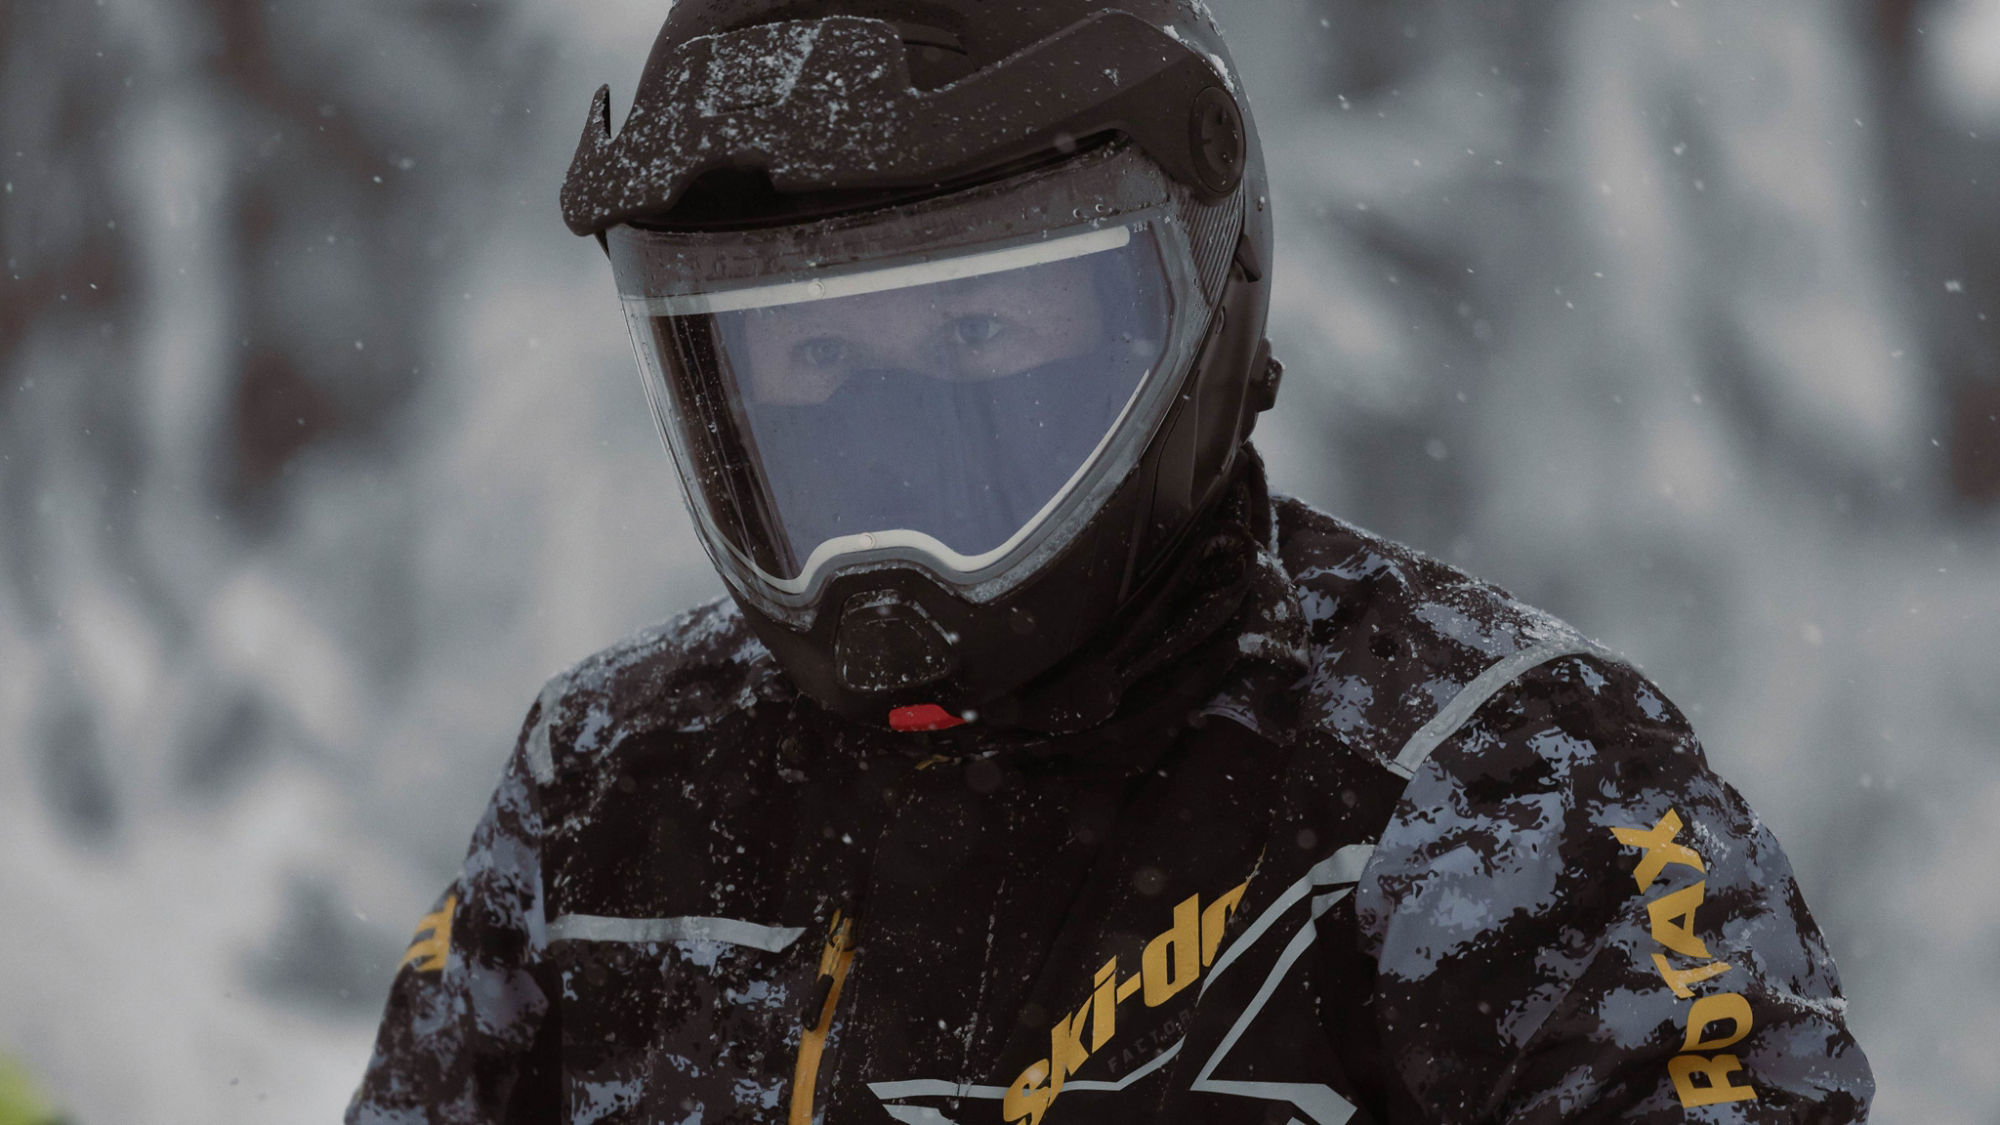 Snowmobile rider wearing a Ski-Doo brand jacket and an Advex safety helmet